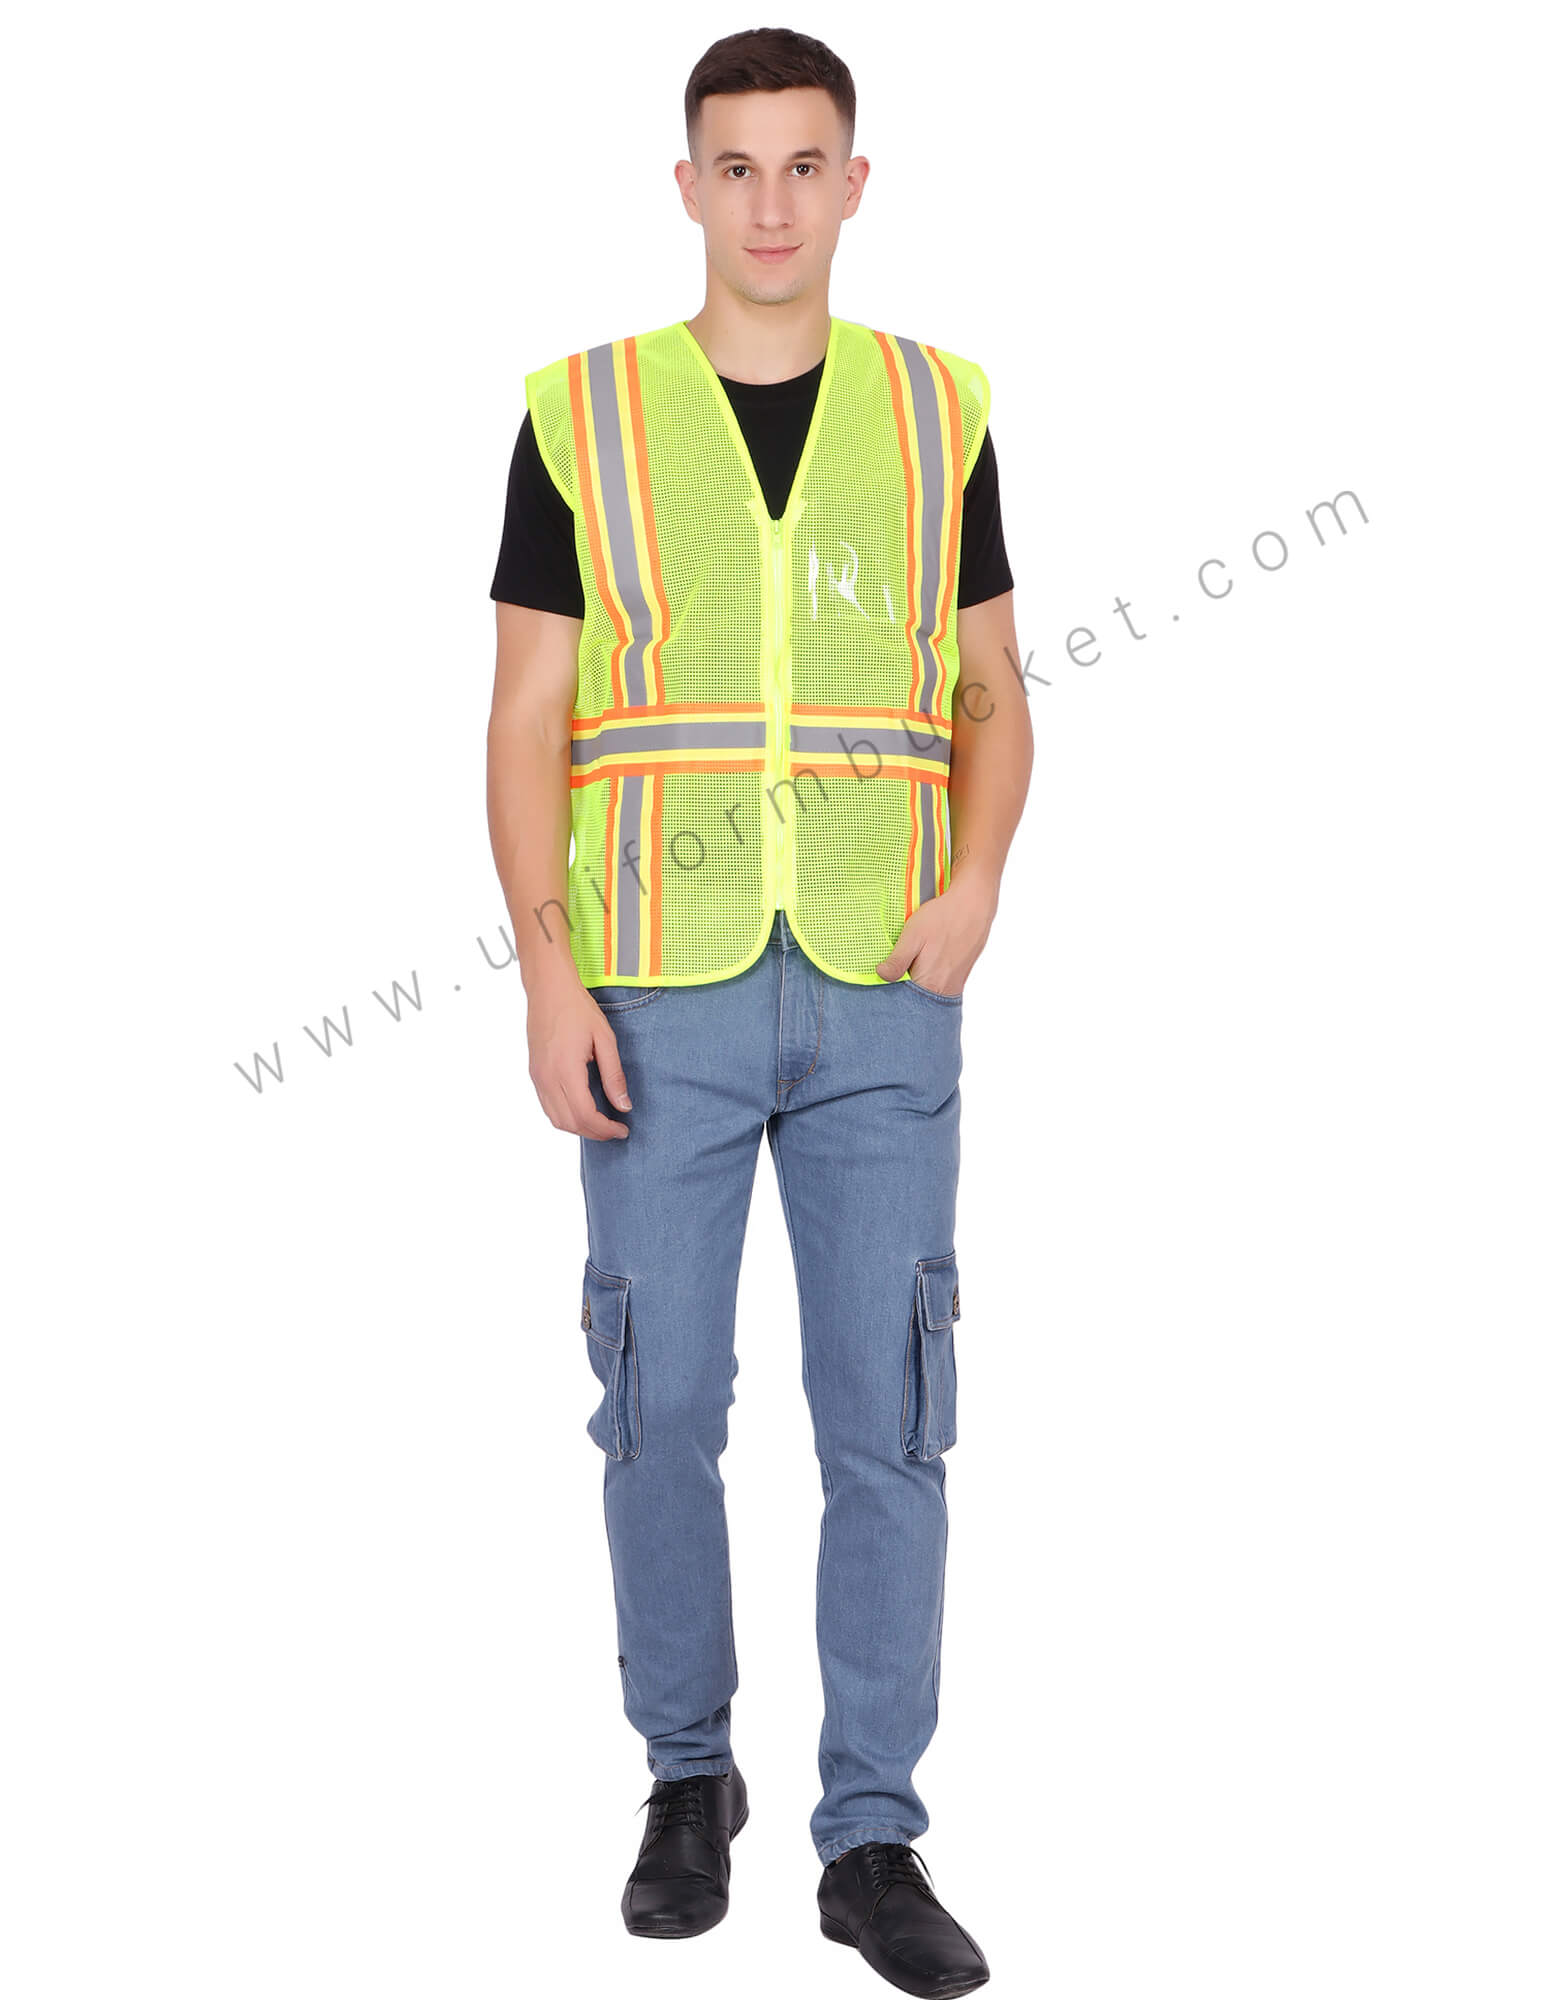 Buy Yellow Net Type Safety Vest Unisex Online @ Best Prices in India ...